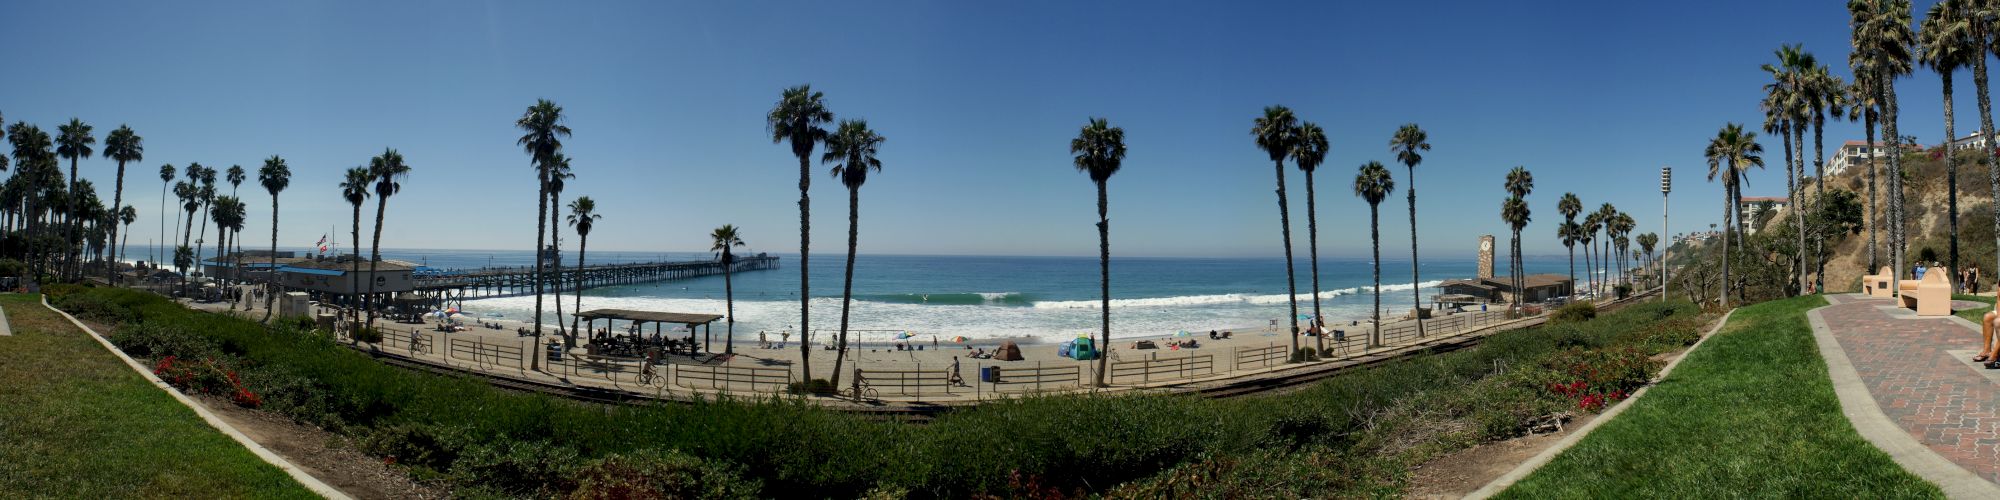 A panoramic view of a beach with palm trees, a pier extending into the ocean, and people enjoying the sand and waves.